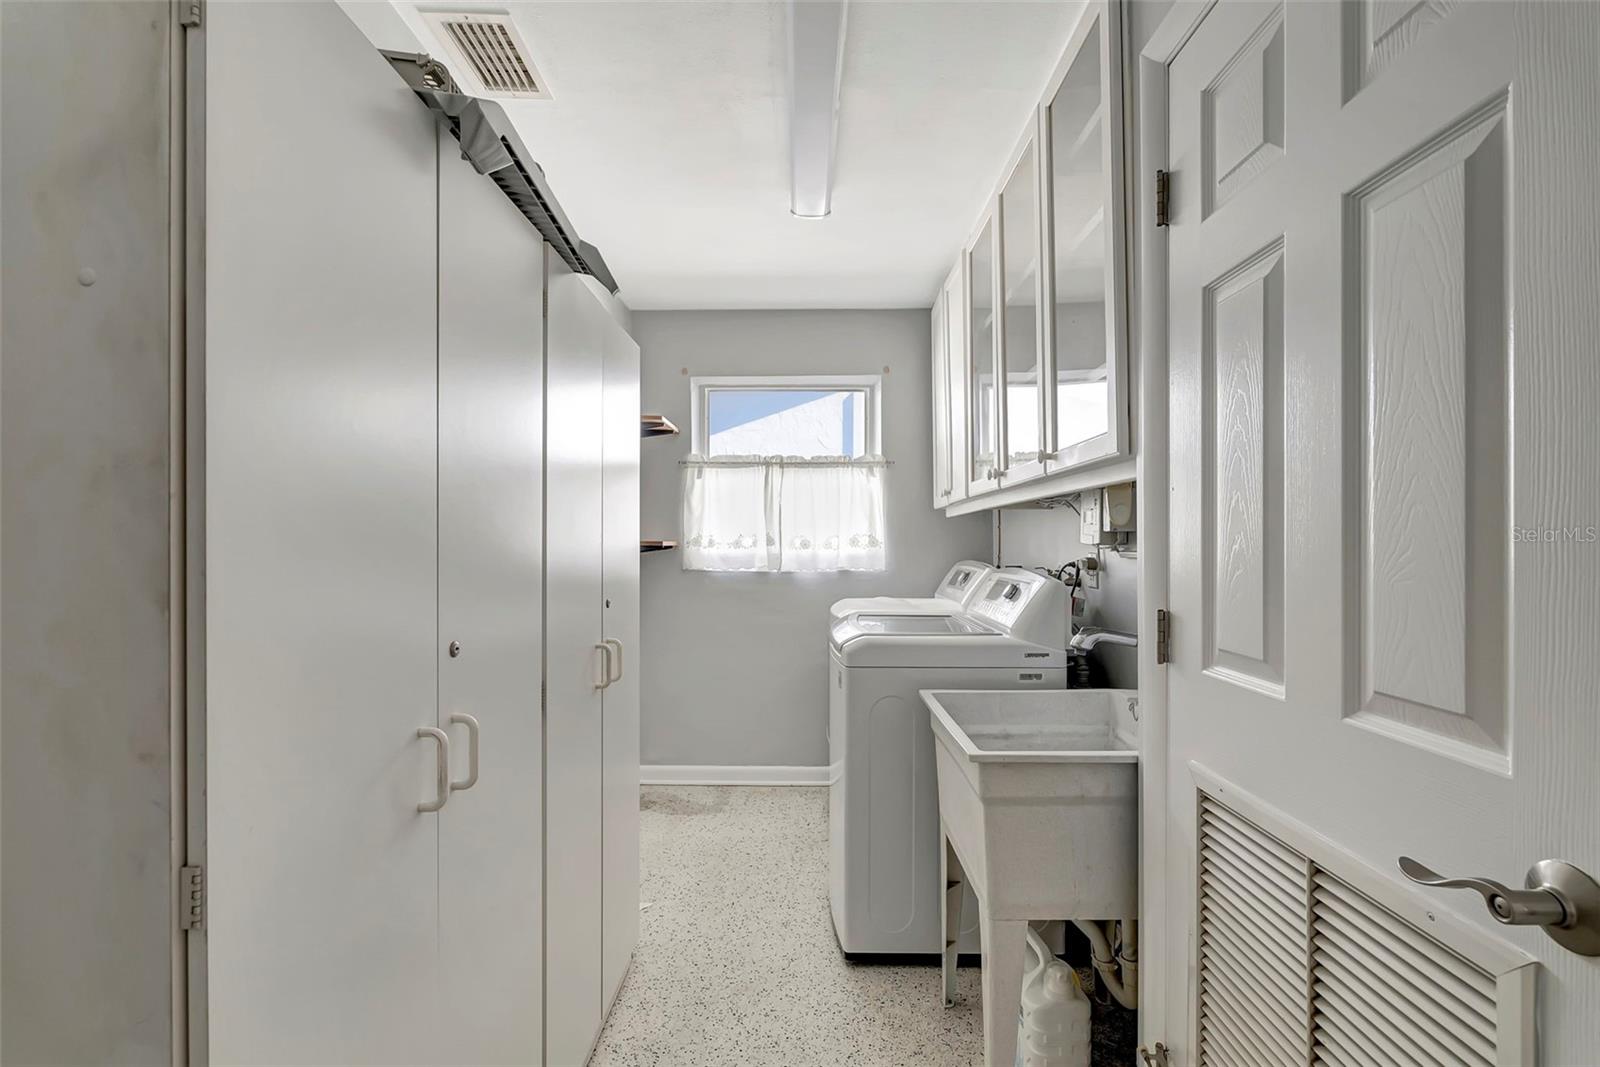 An extra large laundry room